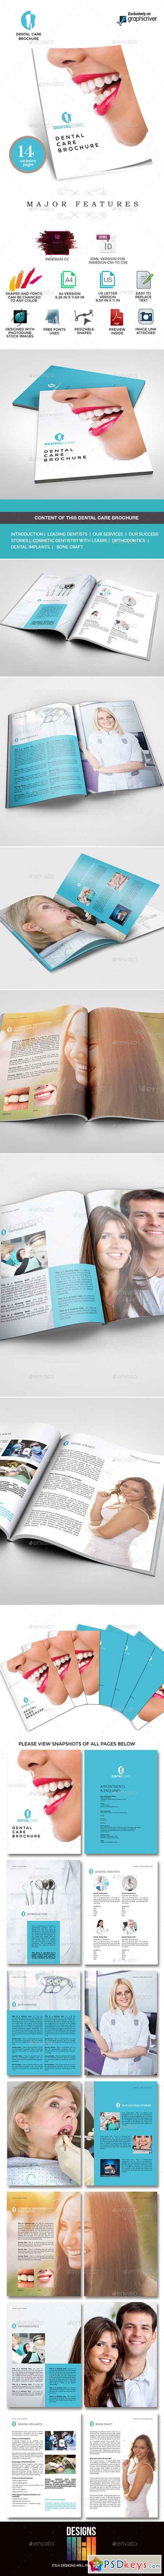 Dental Clinic Services or Care Brochure 9529058